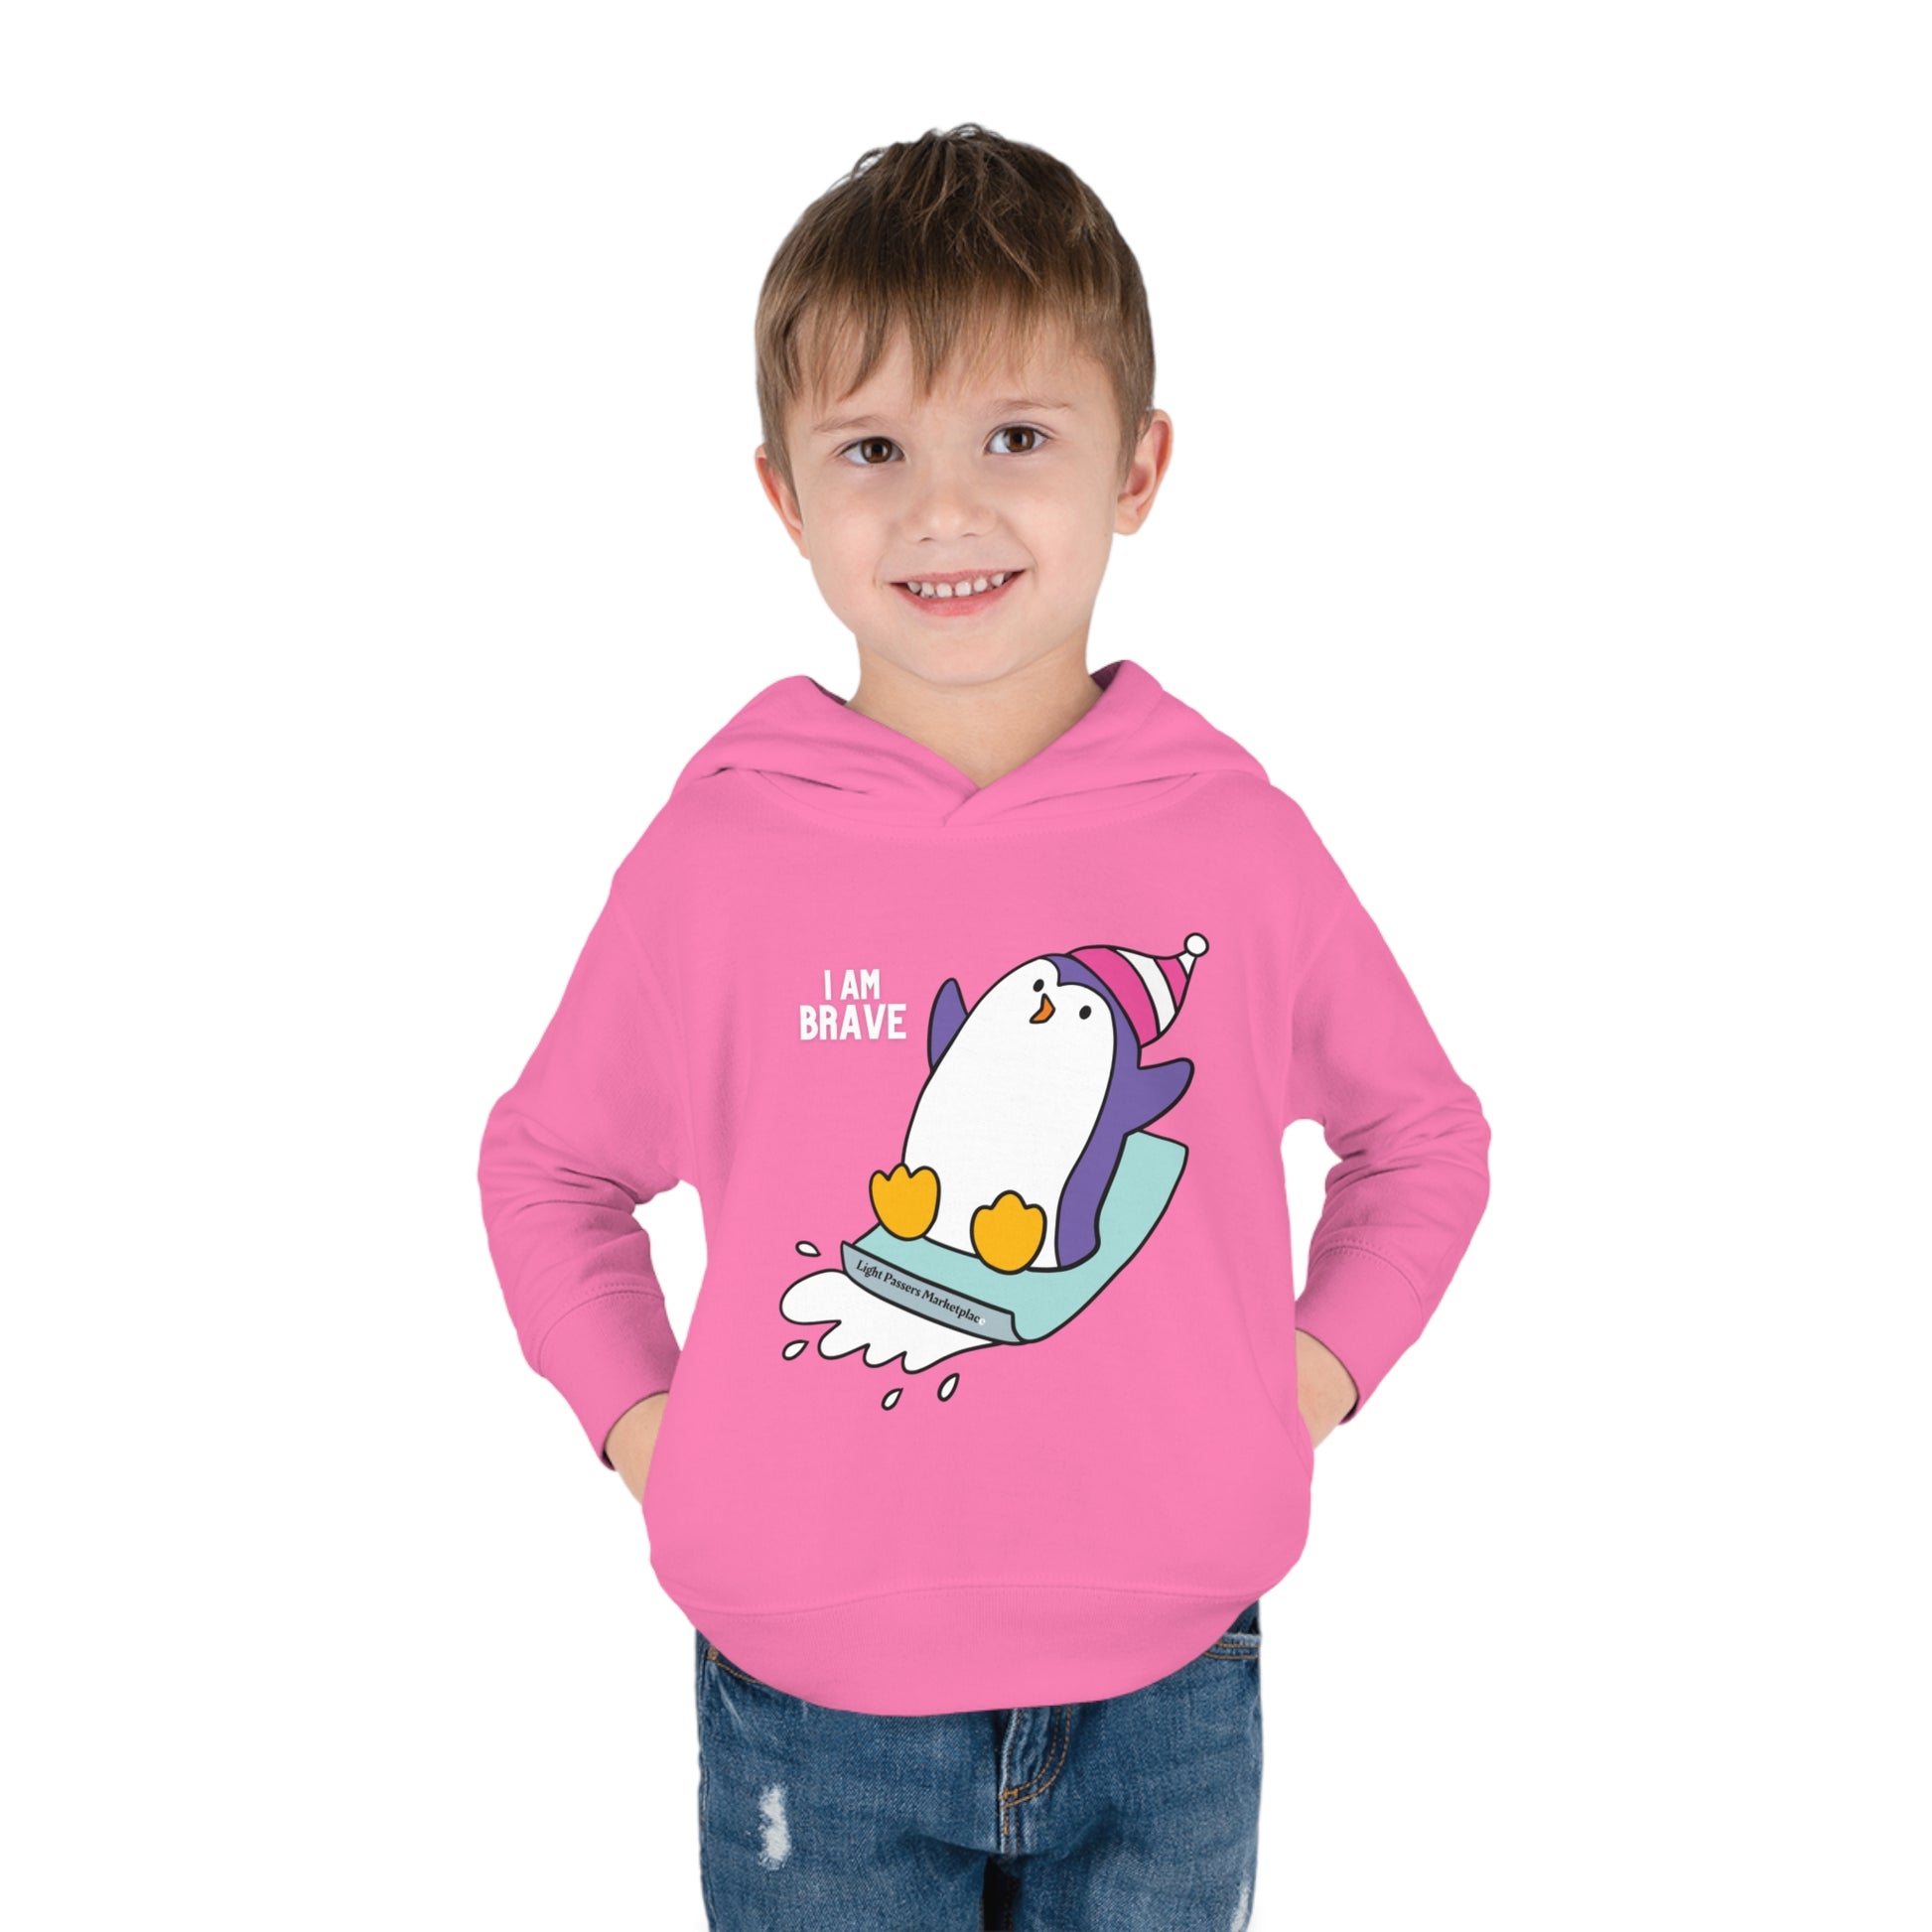 A toddler in a pink hoodie with a playful penguin design, showcasing cover-stitched details, side seam pockets, and a durable double-needle hem hood for lasting comfort.